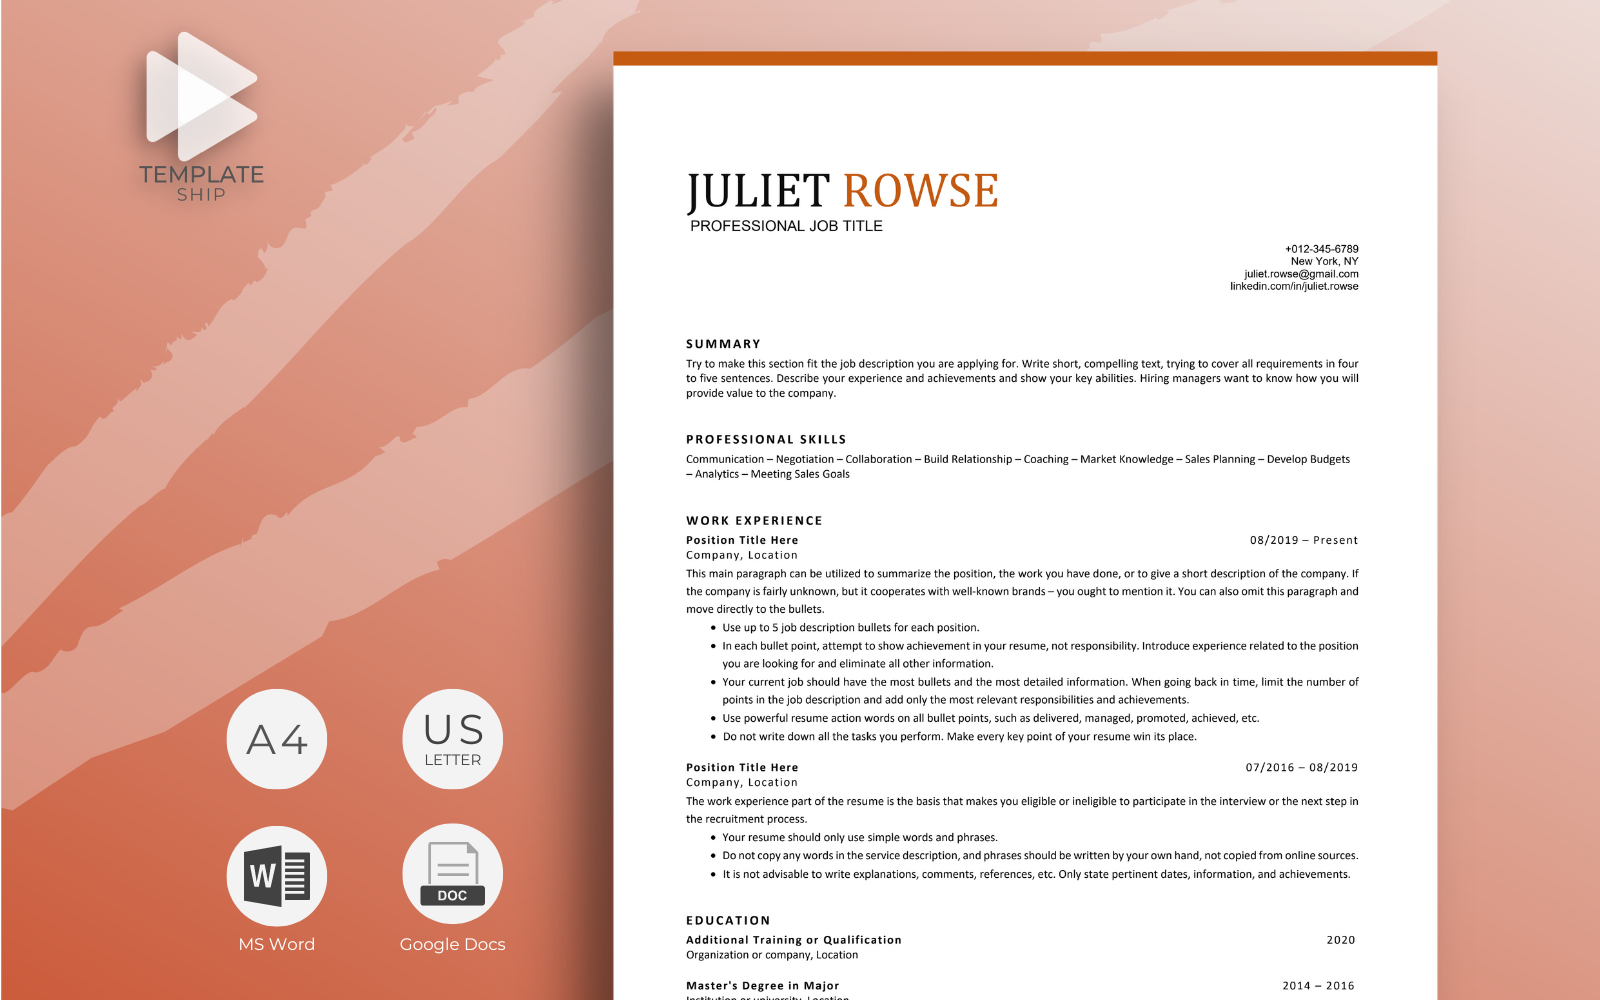 Professional Resume Template Juliet Rowse